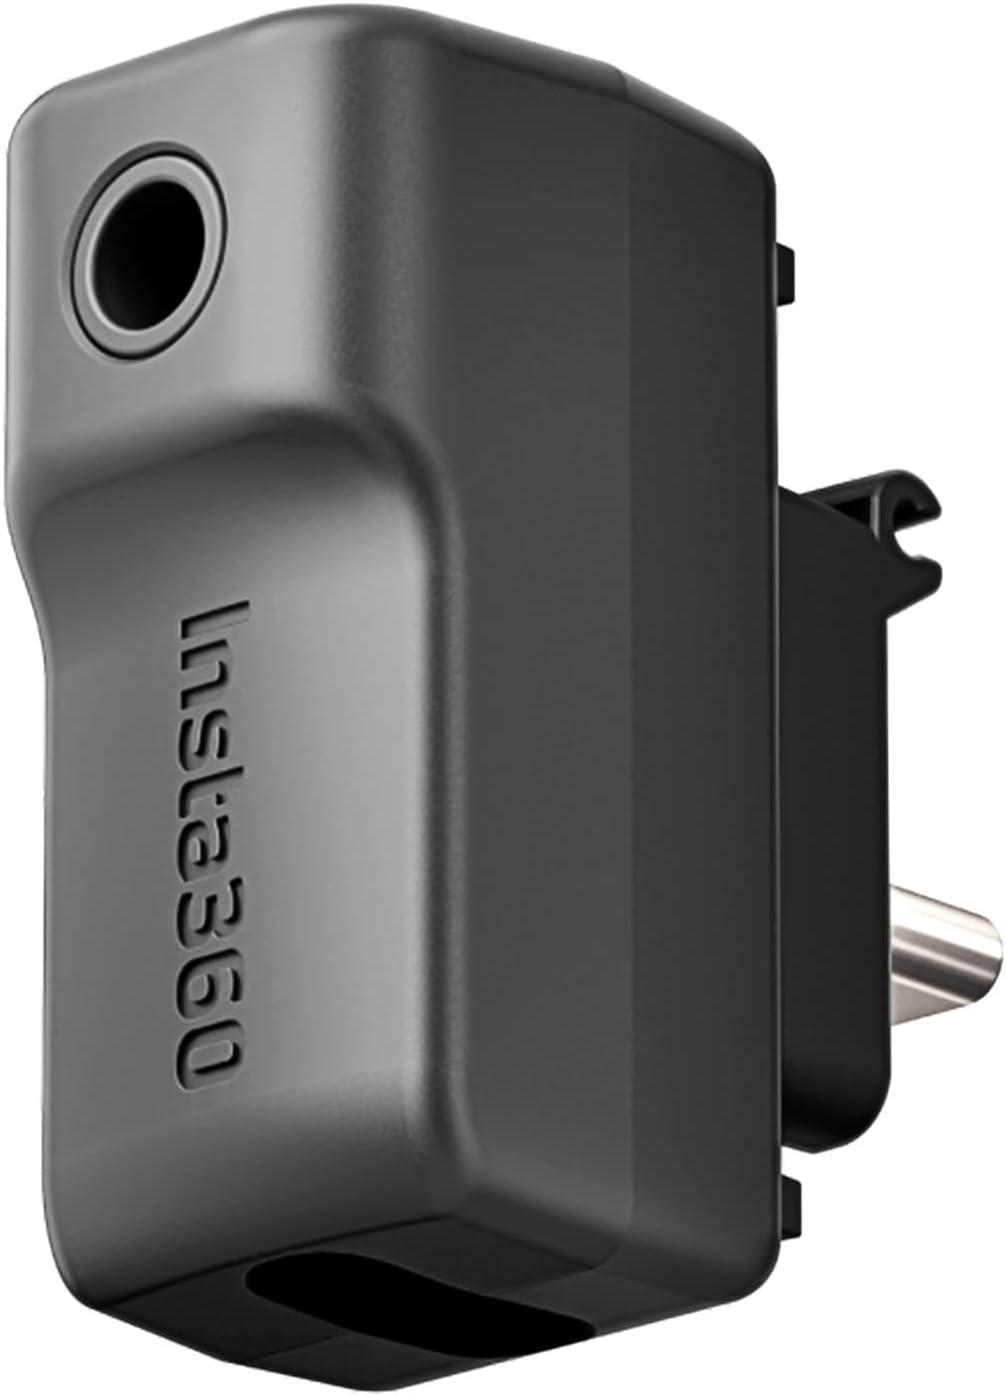 Insta360 Microphone Adapter for ACE and ACE PRO CINSAAXD B&H